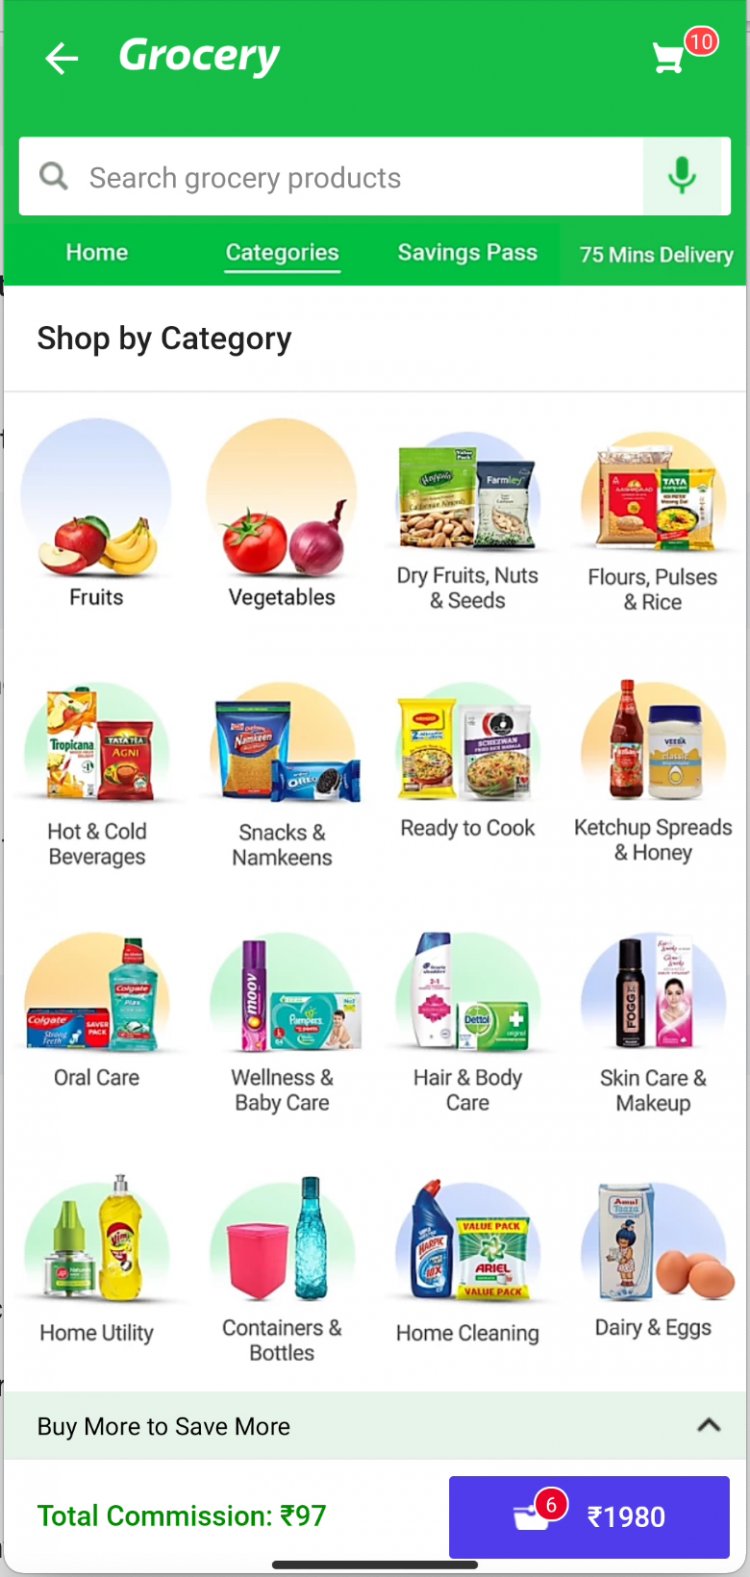 Flipkart’s Shopsy sets target to become the largest grocery retailer, launches grocery in 700 cities